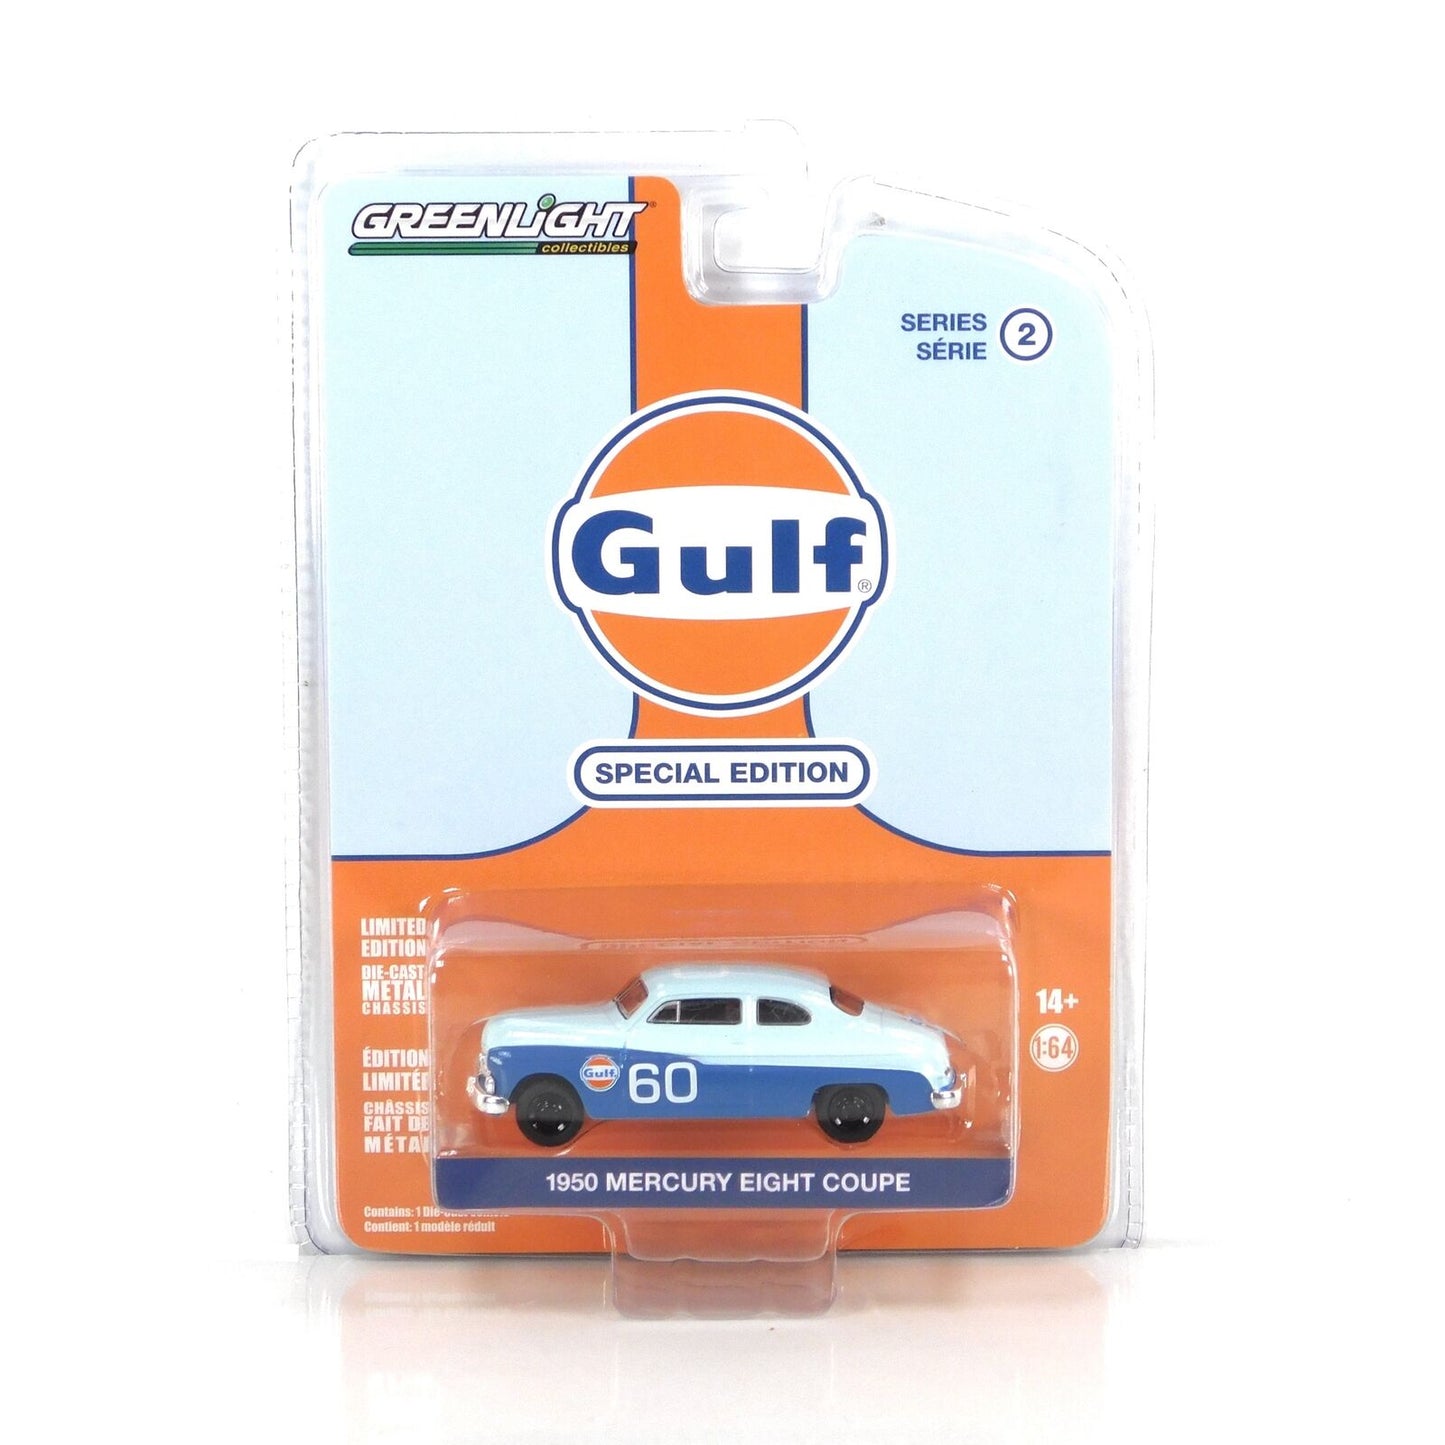 GreenLight 1:64 Gulf Oil Special Edition Series 2 - 1950 Mercury Eight Coupe #60 41145-B